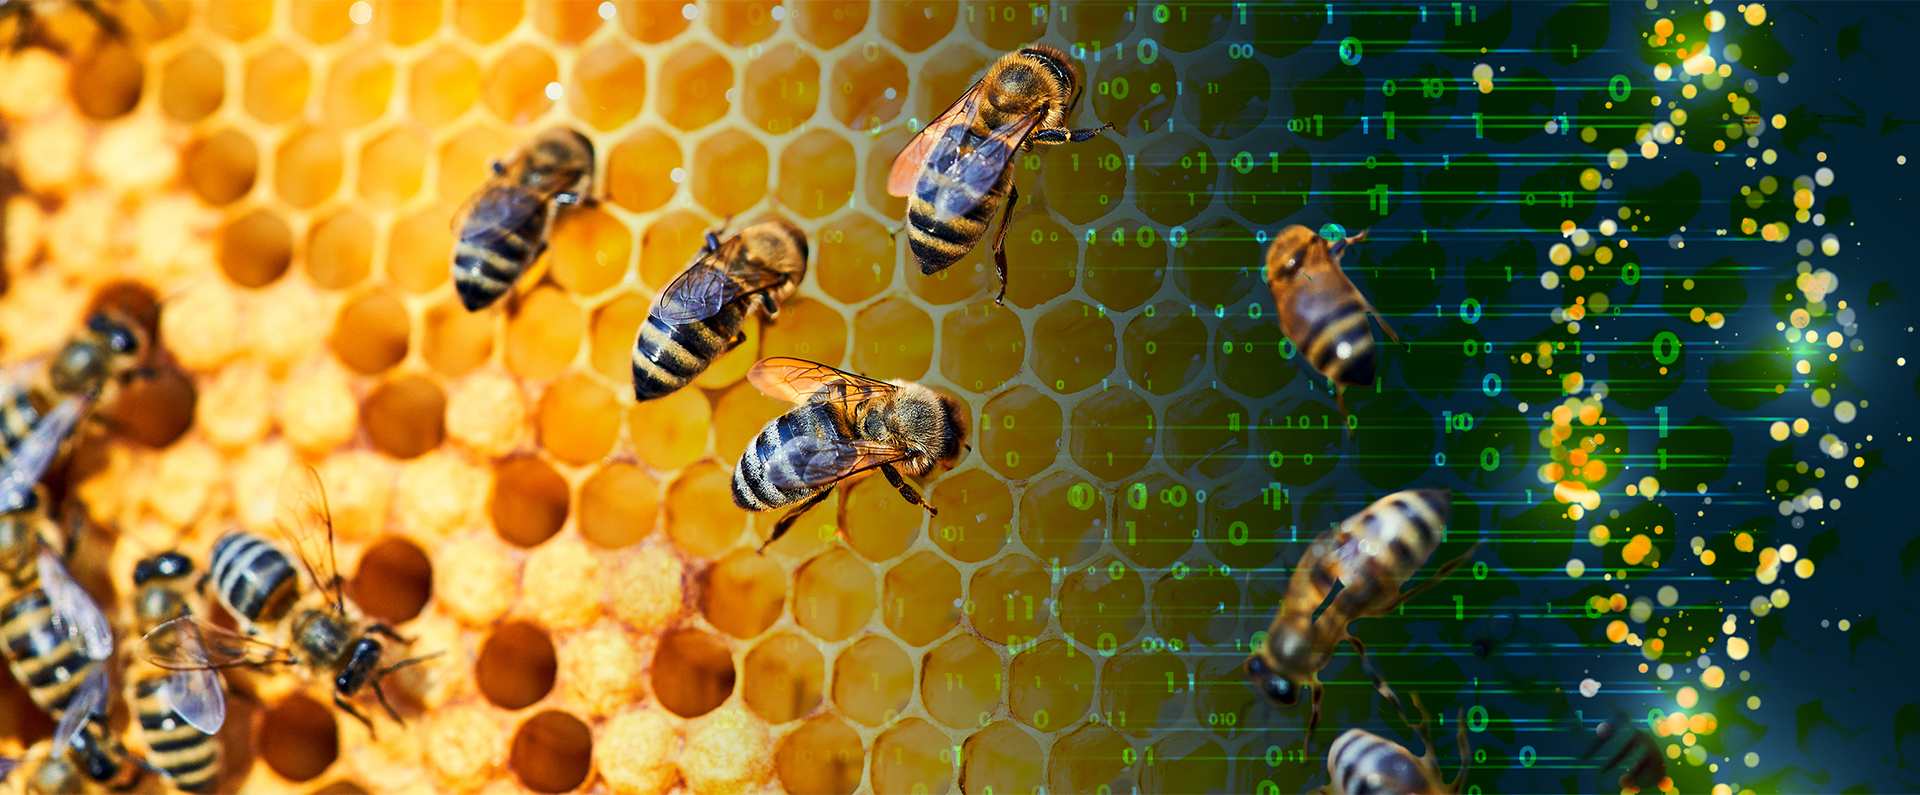 Photo illustration of Bee Genome concept.